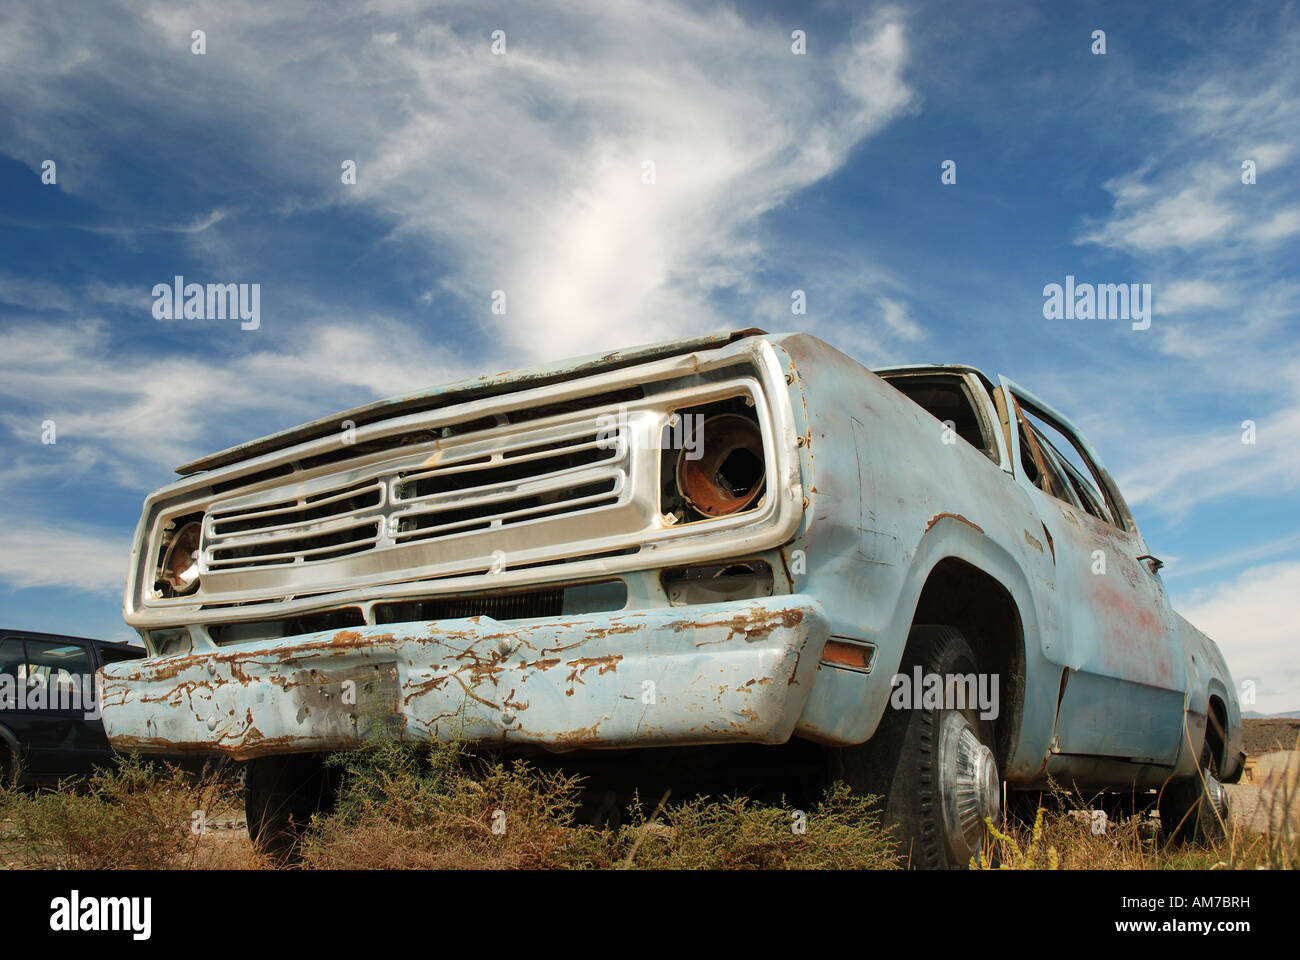 Abandoned American Pick-up truck Stock Photo